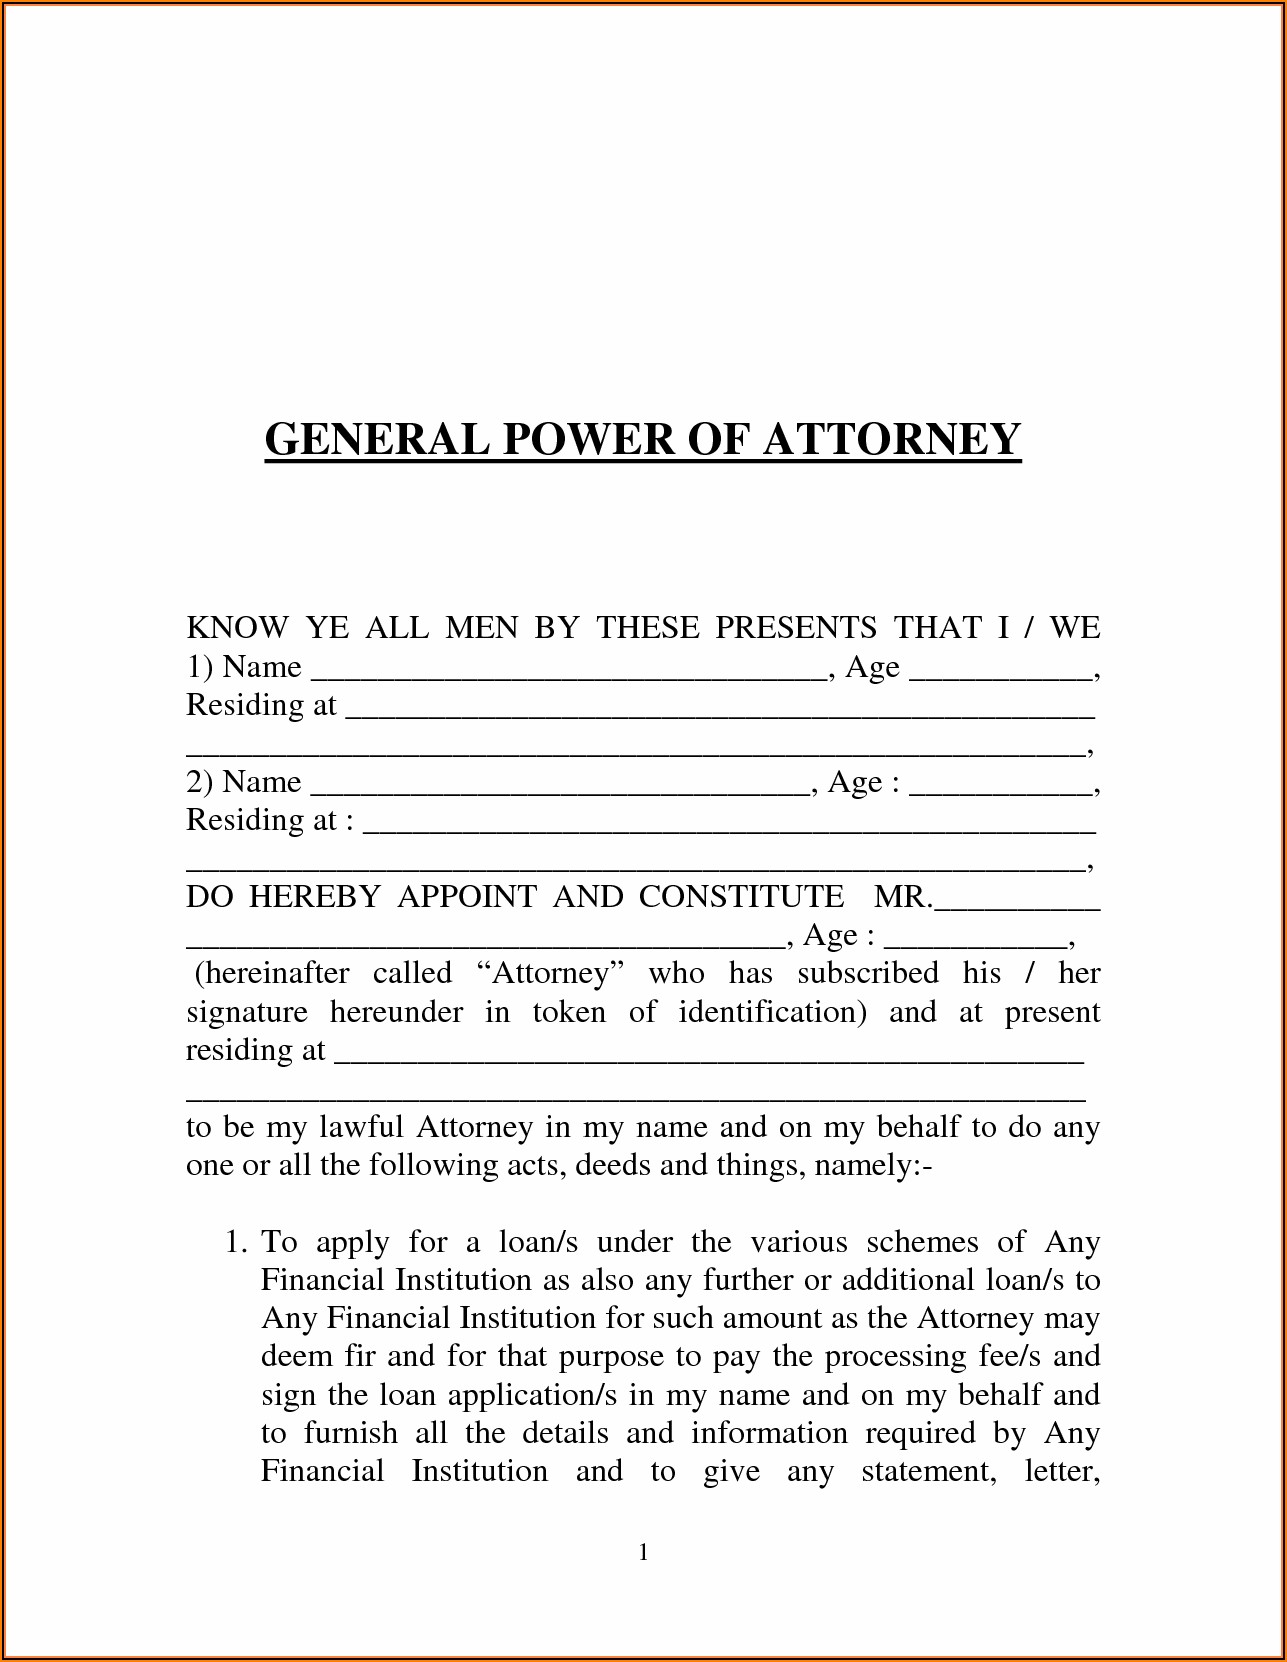 Sample Form Of General Power Of Attorney